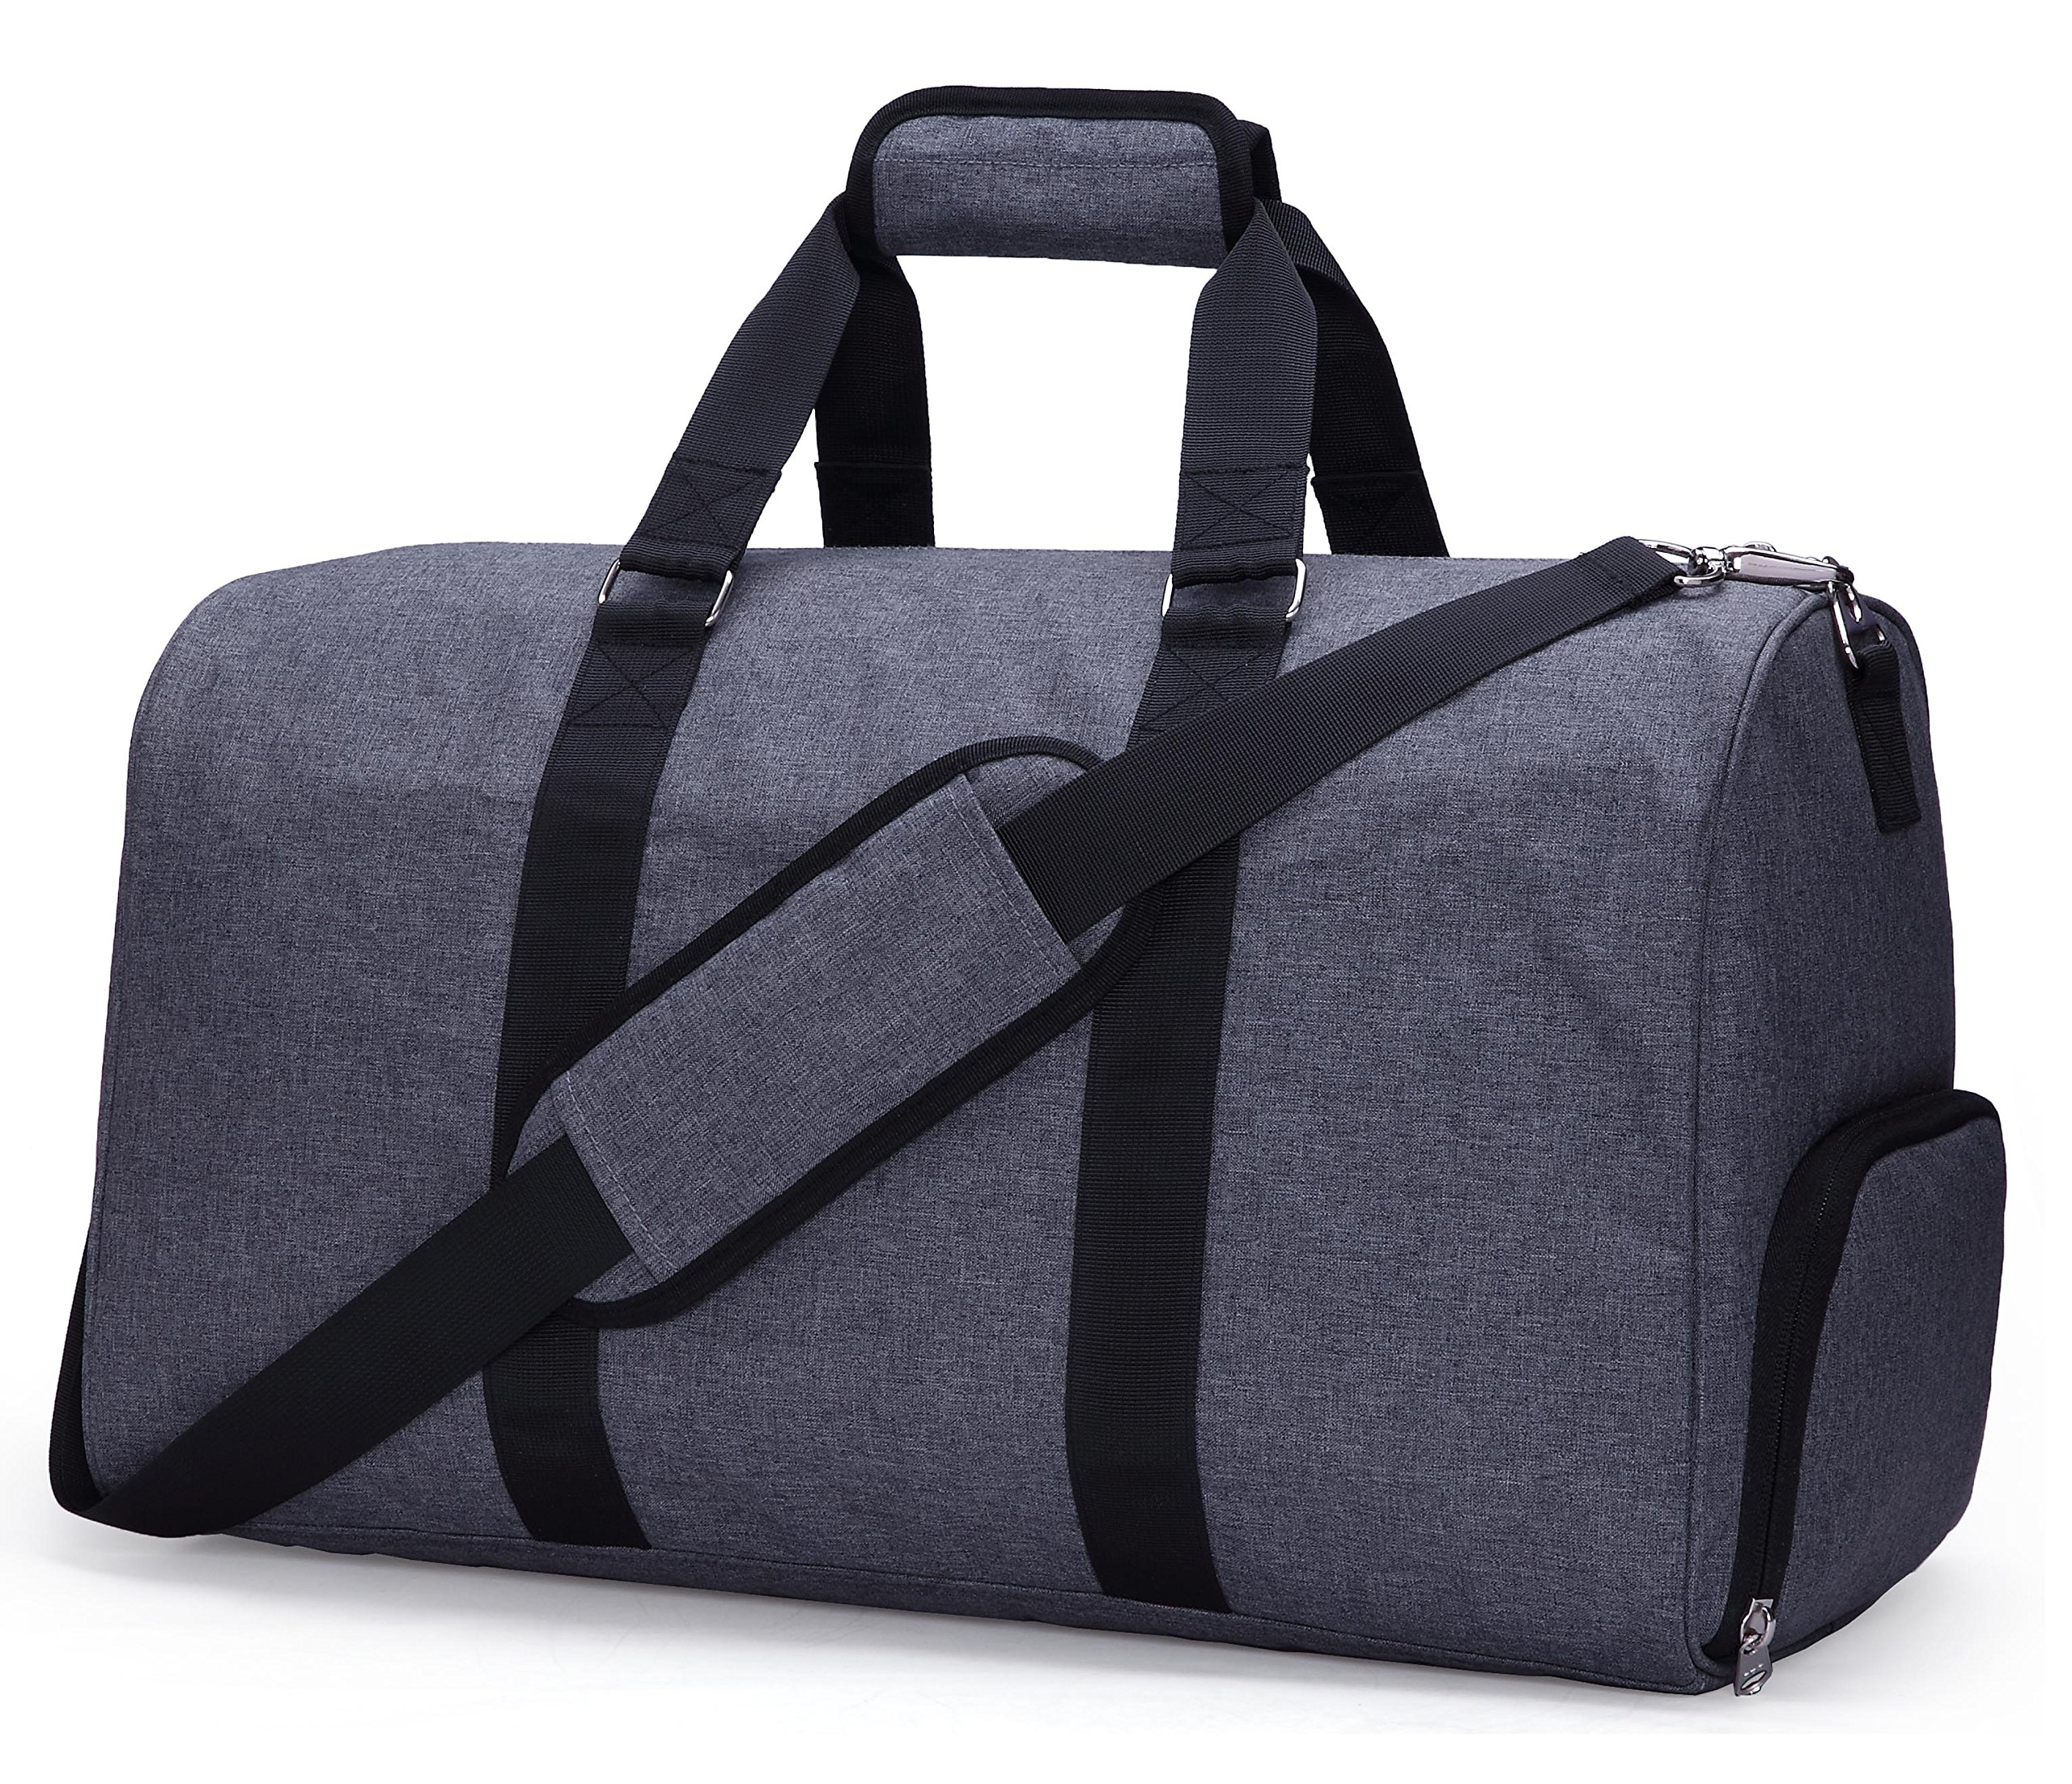 ​MIER Gym Duffel Bag for Men and Women